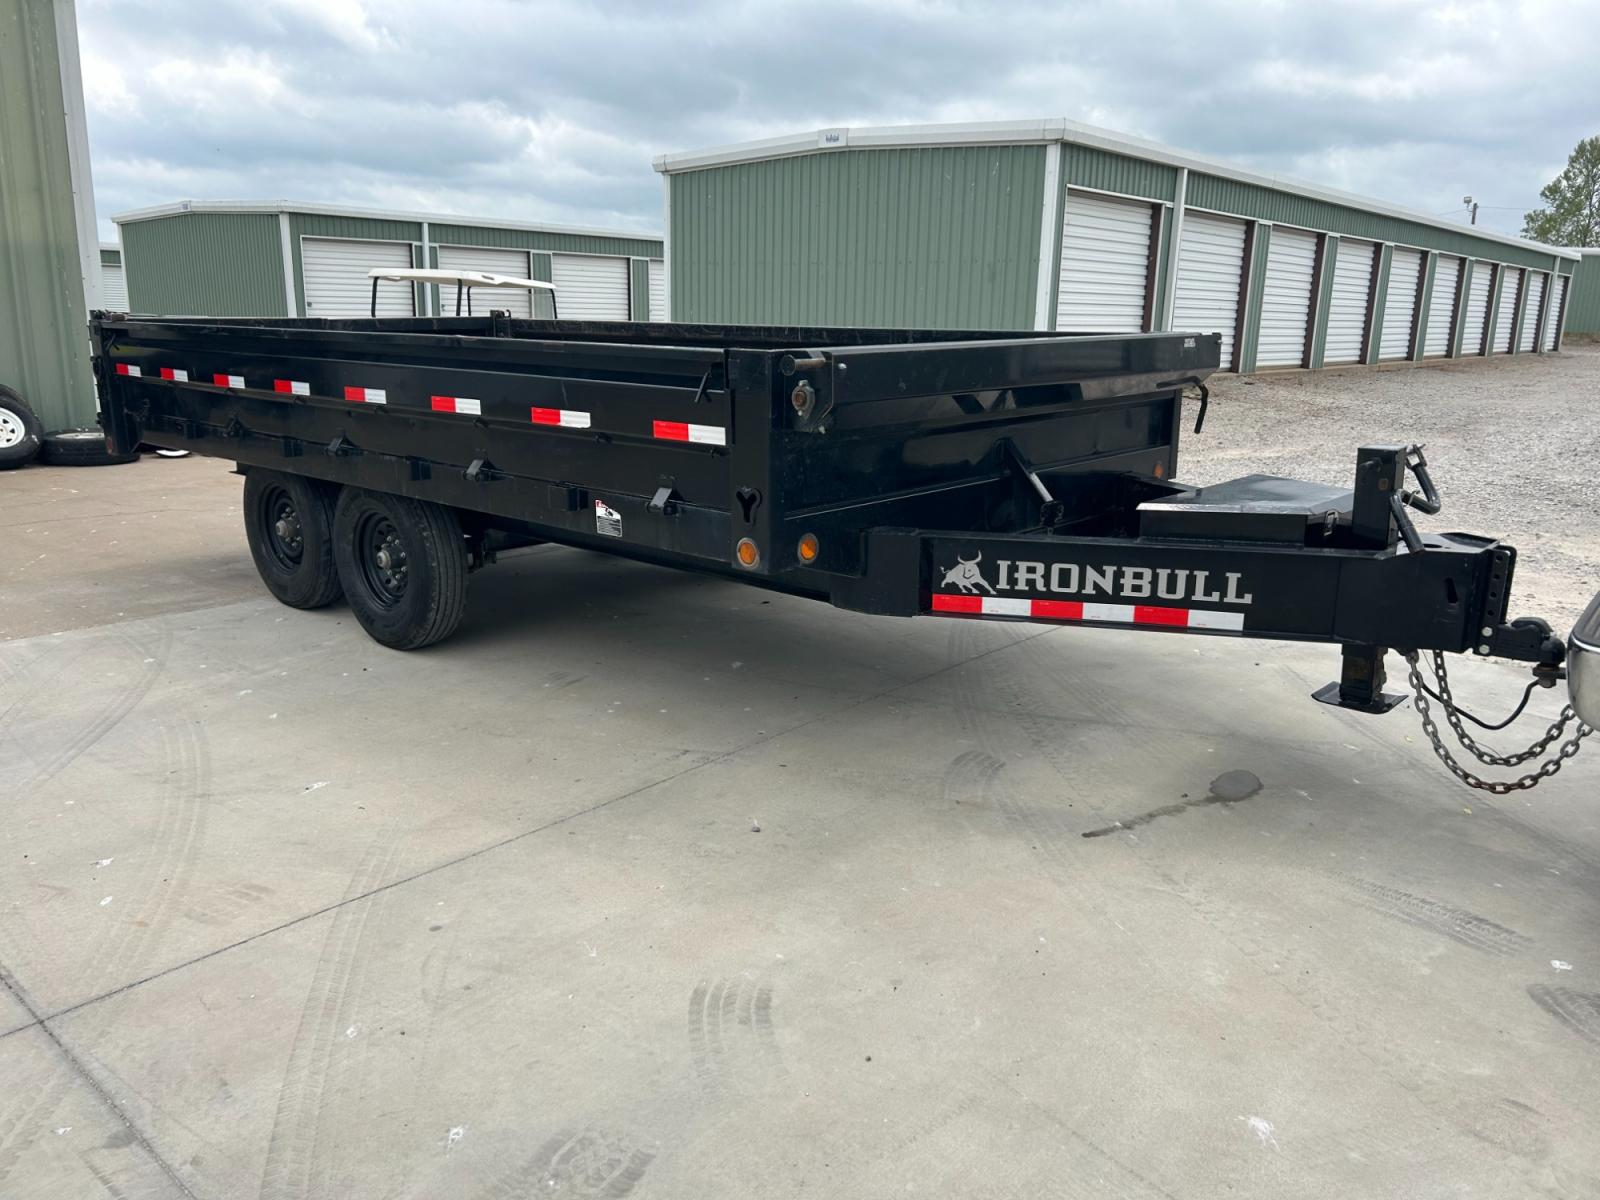 2022 BLACK IRONBULL DUMP TRAILER DUMPBED (50HDP1620N1) , located at 17760 Hwy 62, Morris, OK, 74445, 35.609104, -95.877060 - 2022 deckover dumps offer a raised deck (above the tires) to accommodate 10 gauge fold down sides and a bed width of 96”. The deckover is equipped standard with 10” I beam frame. 3” channel crossmembers span the 10 gauge smooth steel floor. 2 5/16” couplers are equipped standard on each mode - Photo #0